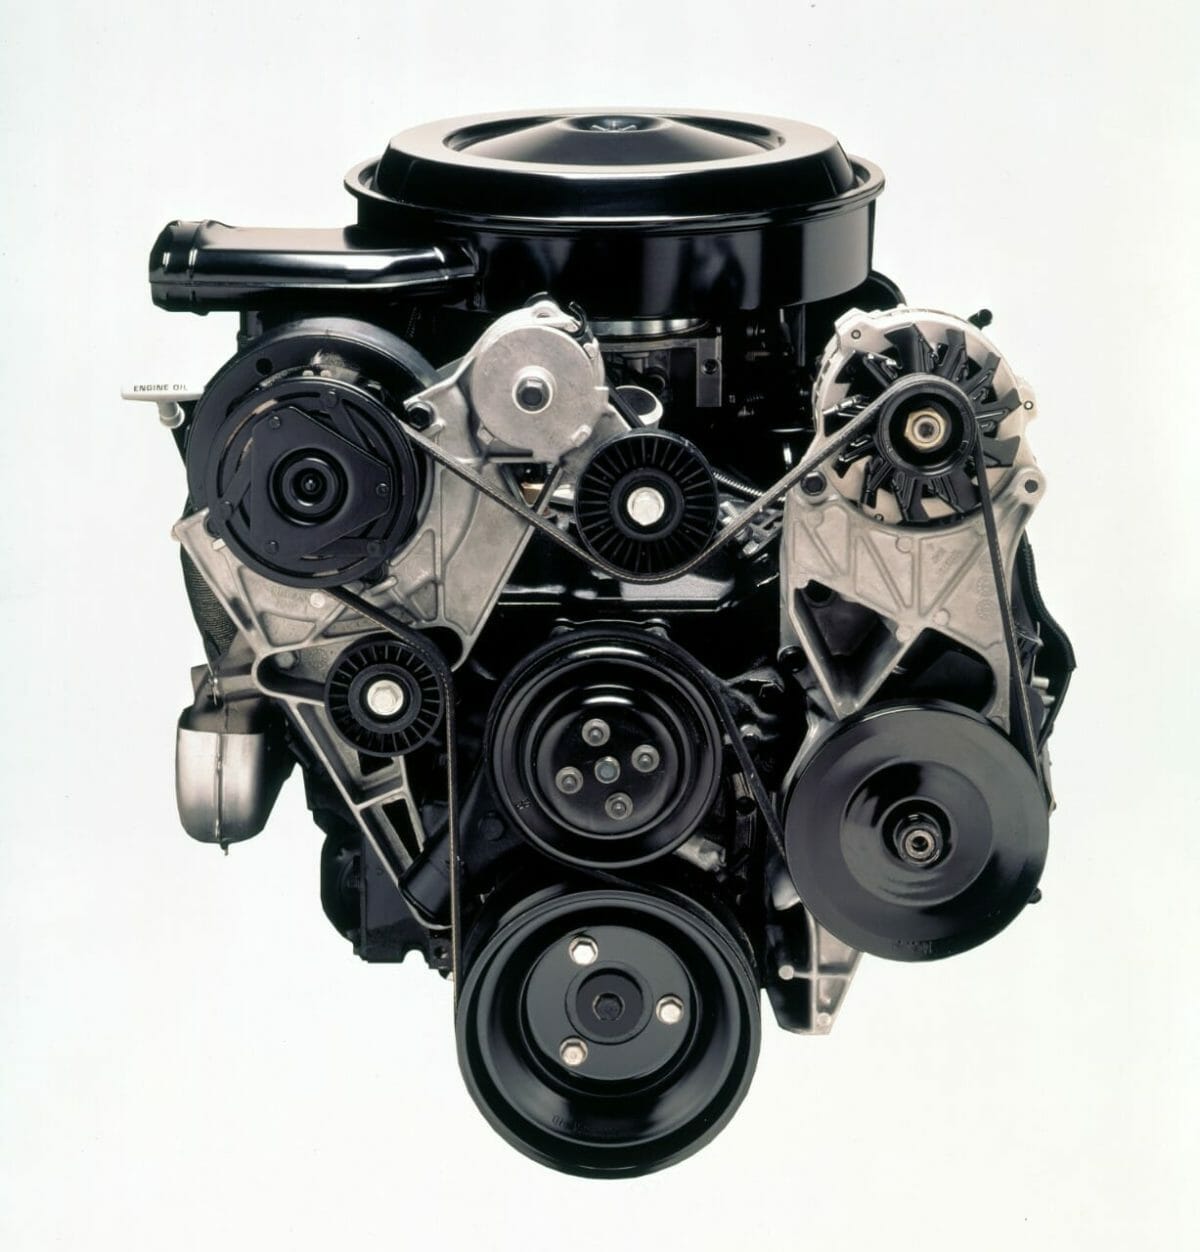 Chevy 305 Engine: The Lesser Loved Small Block